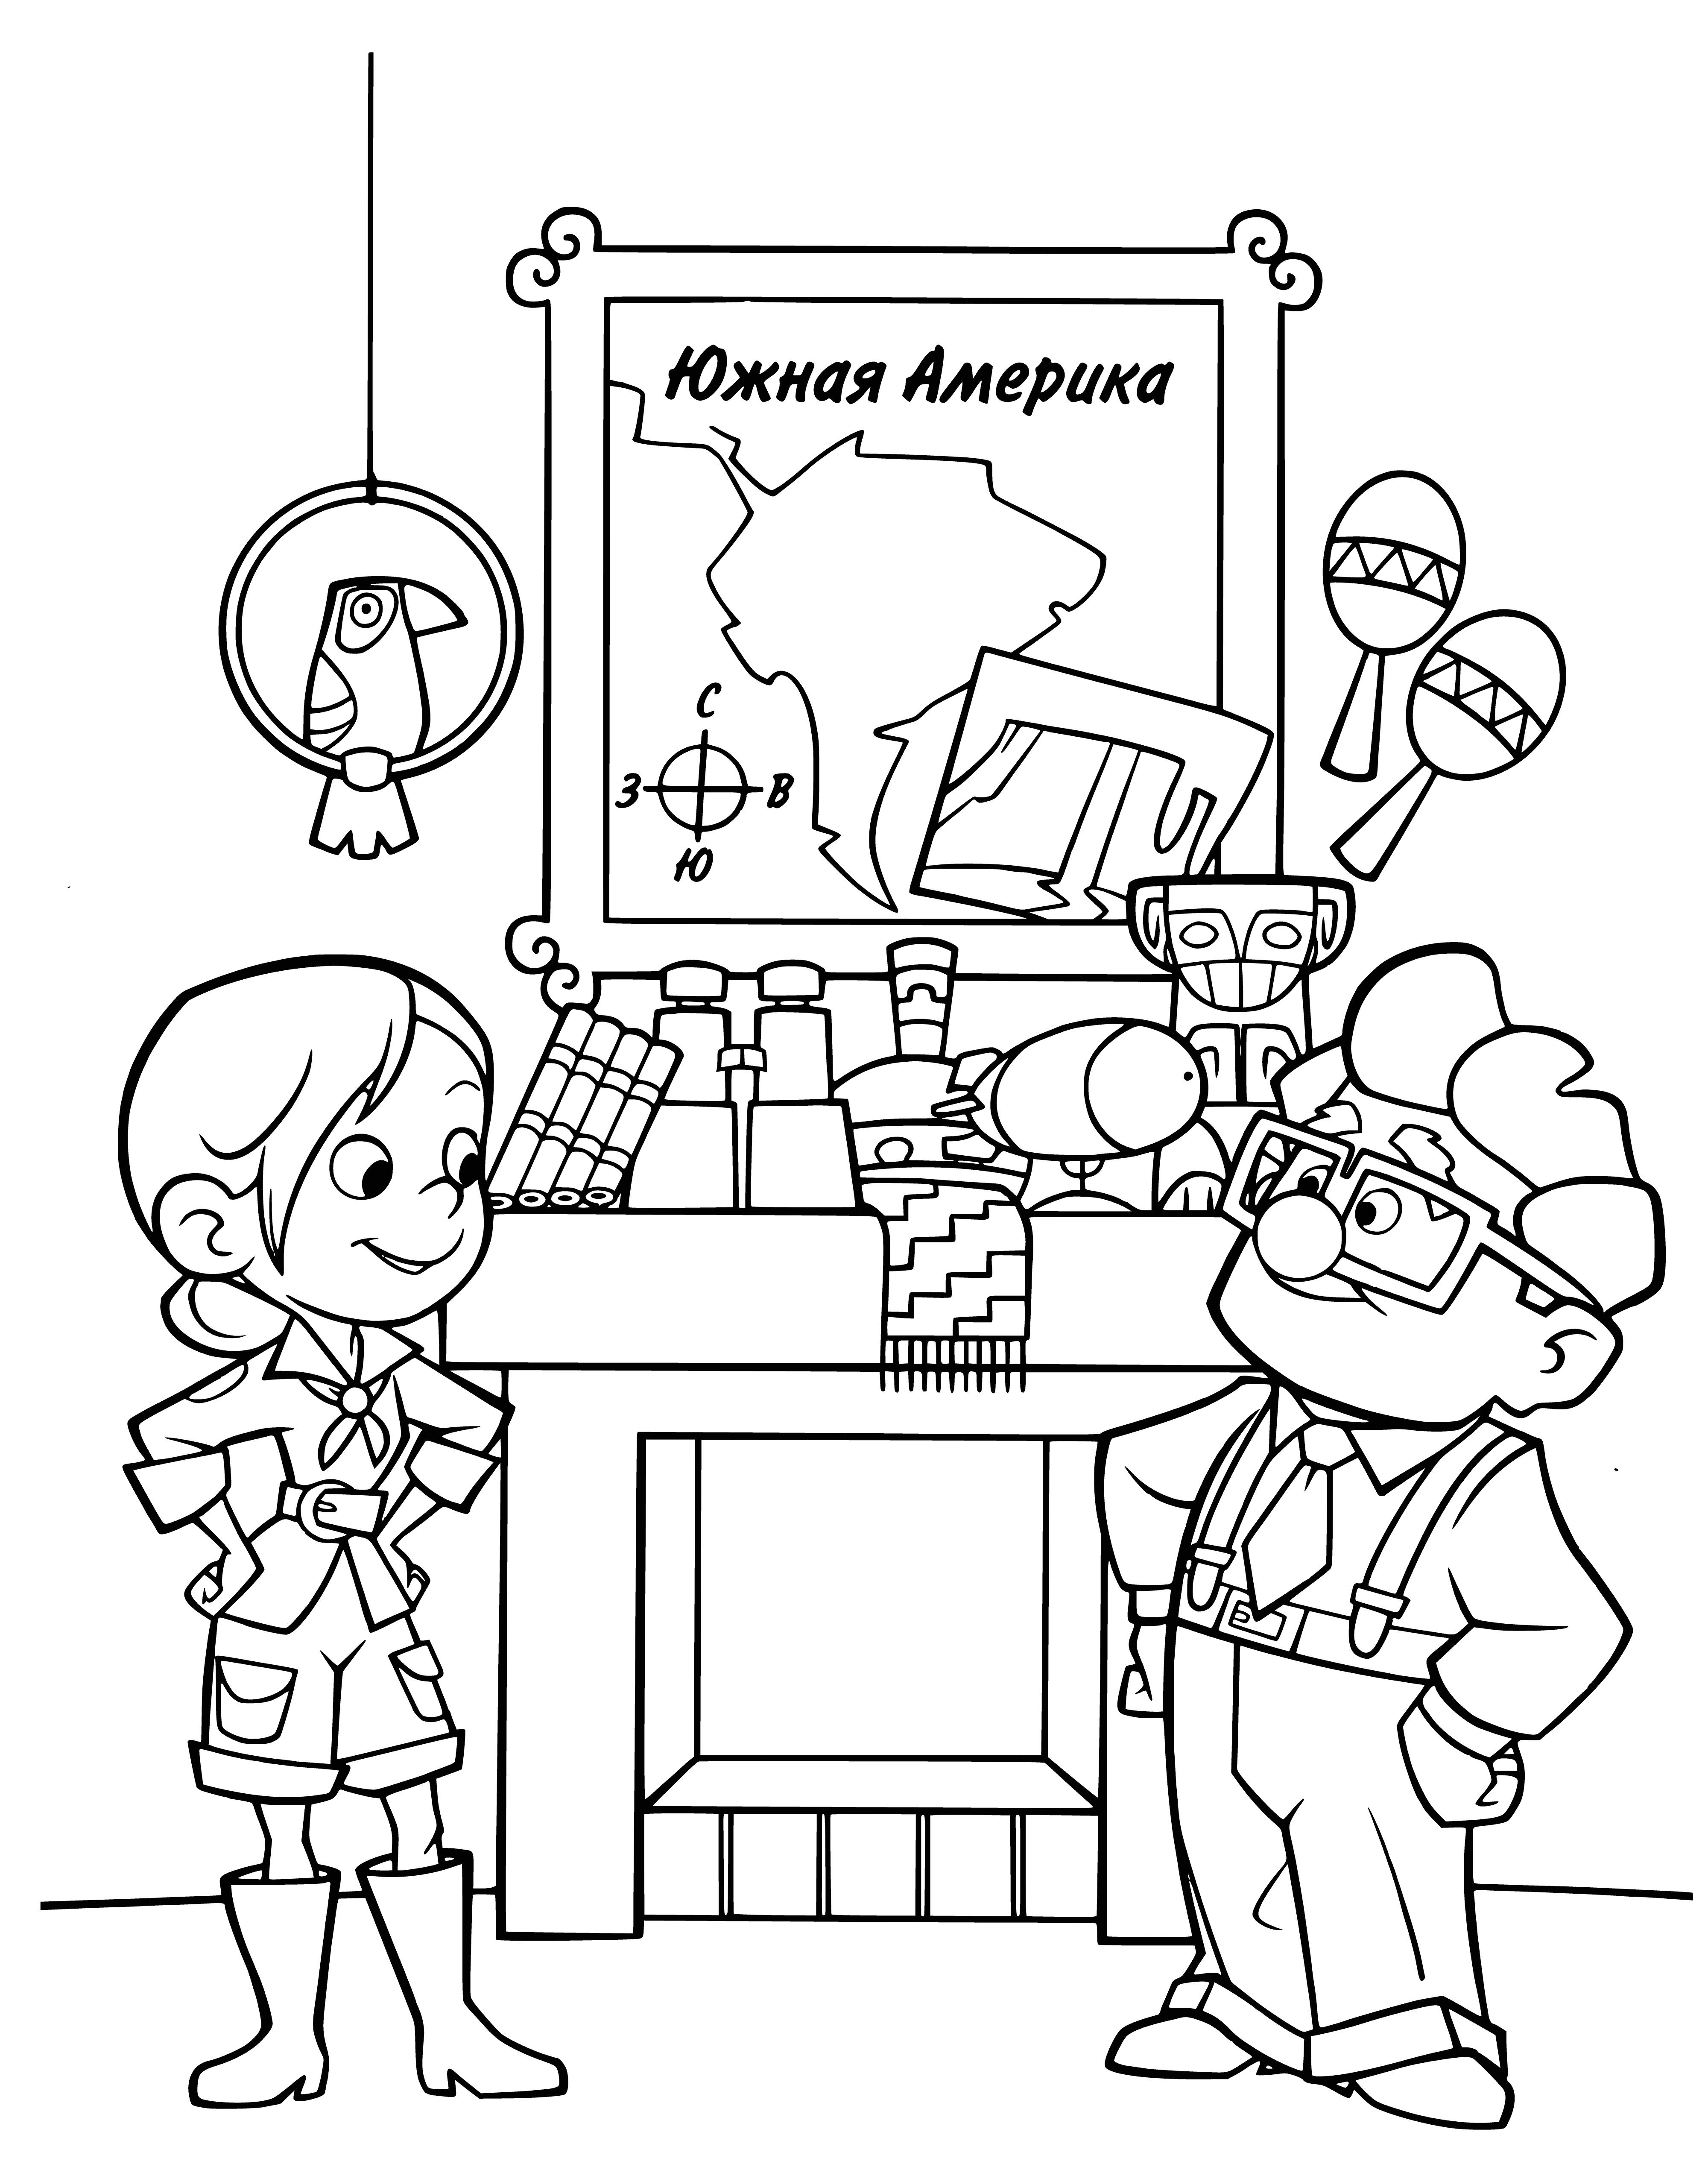 South America coloring page